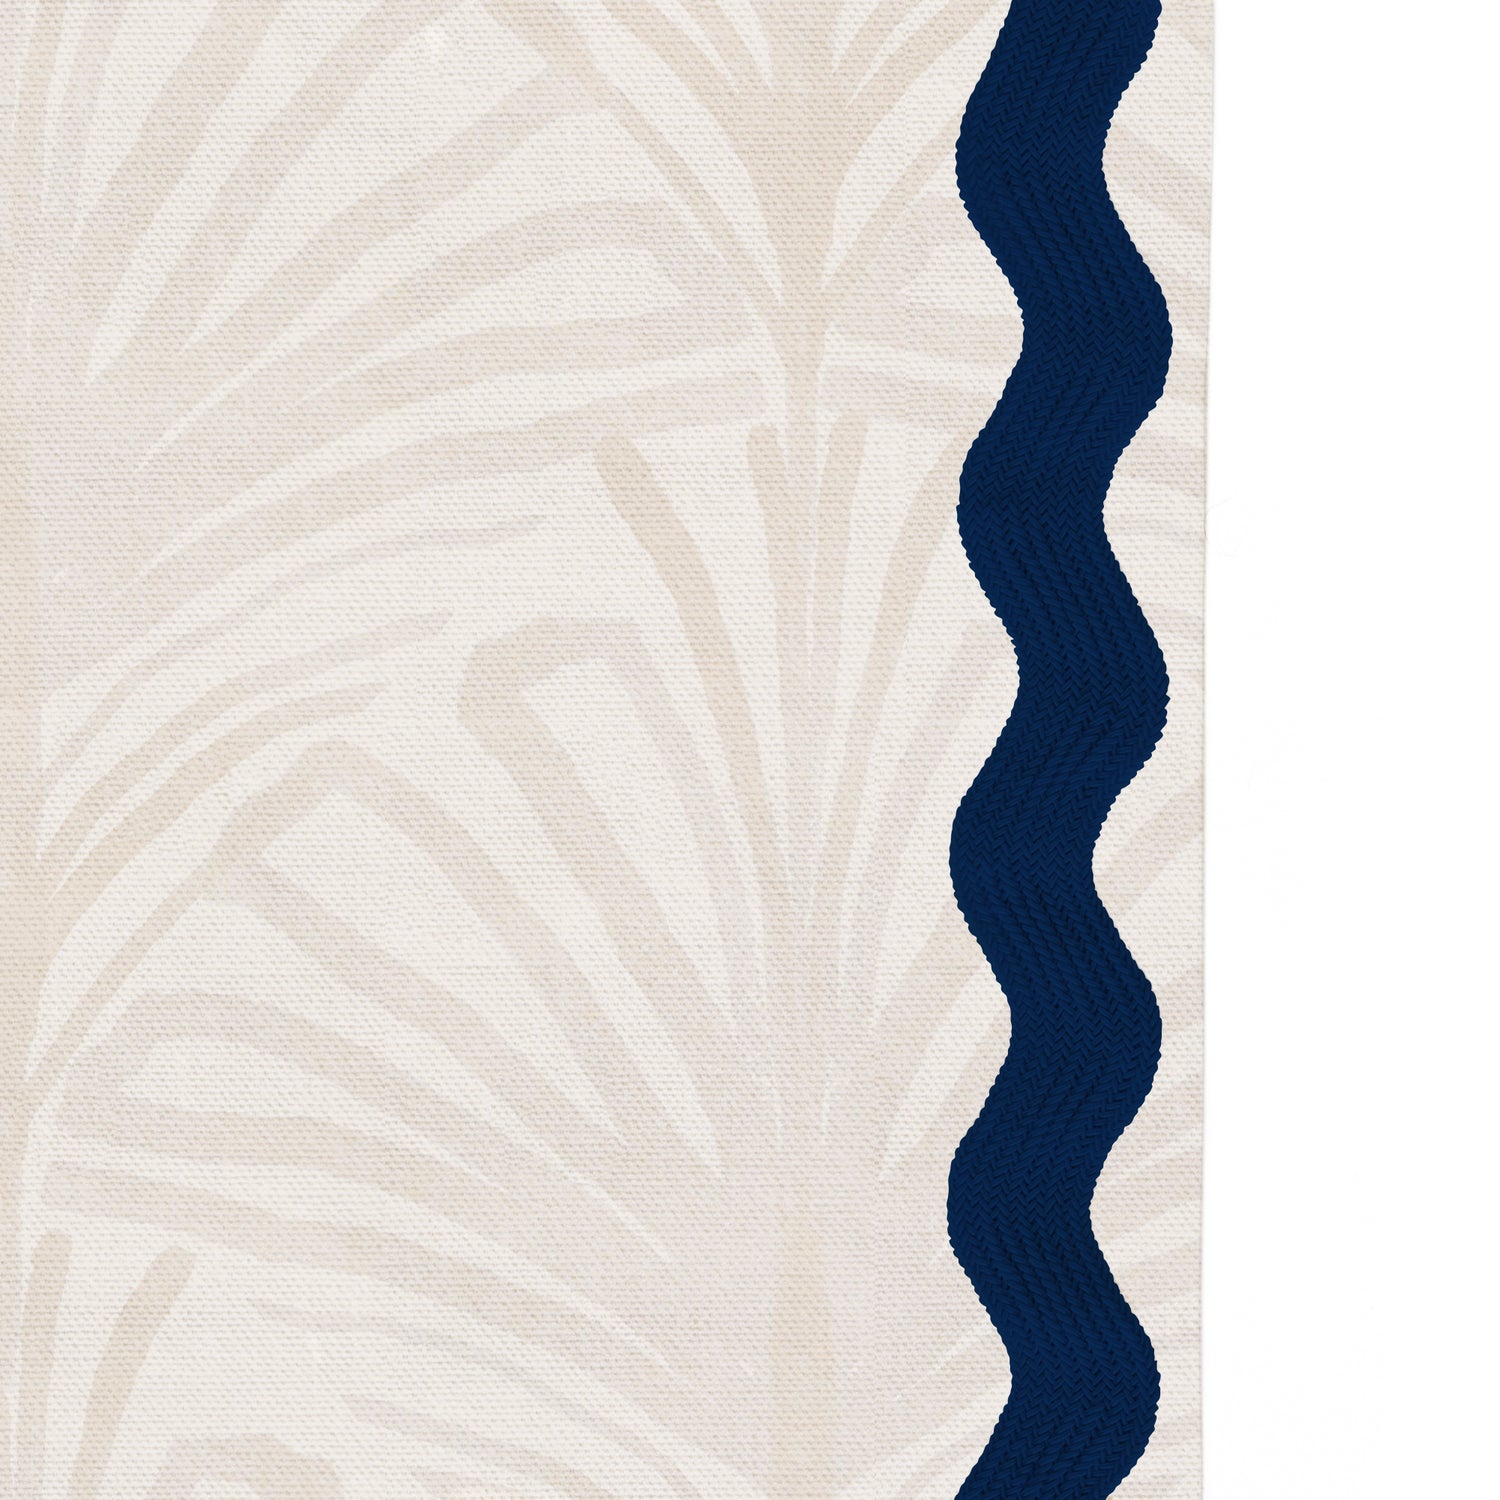 Upclose picture of Suzy Sand custom Beige Palmshower curtain with midnight rick rack trim